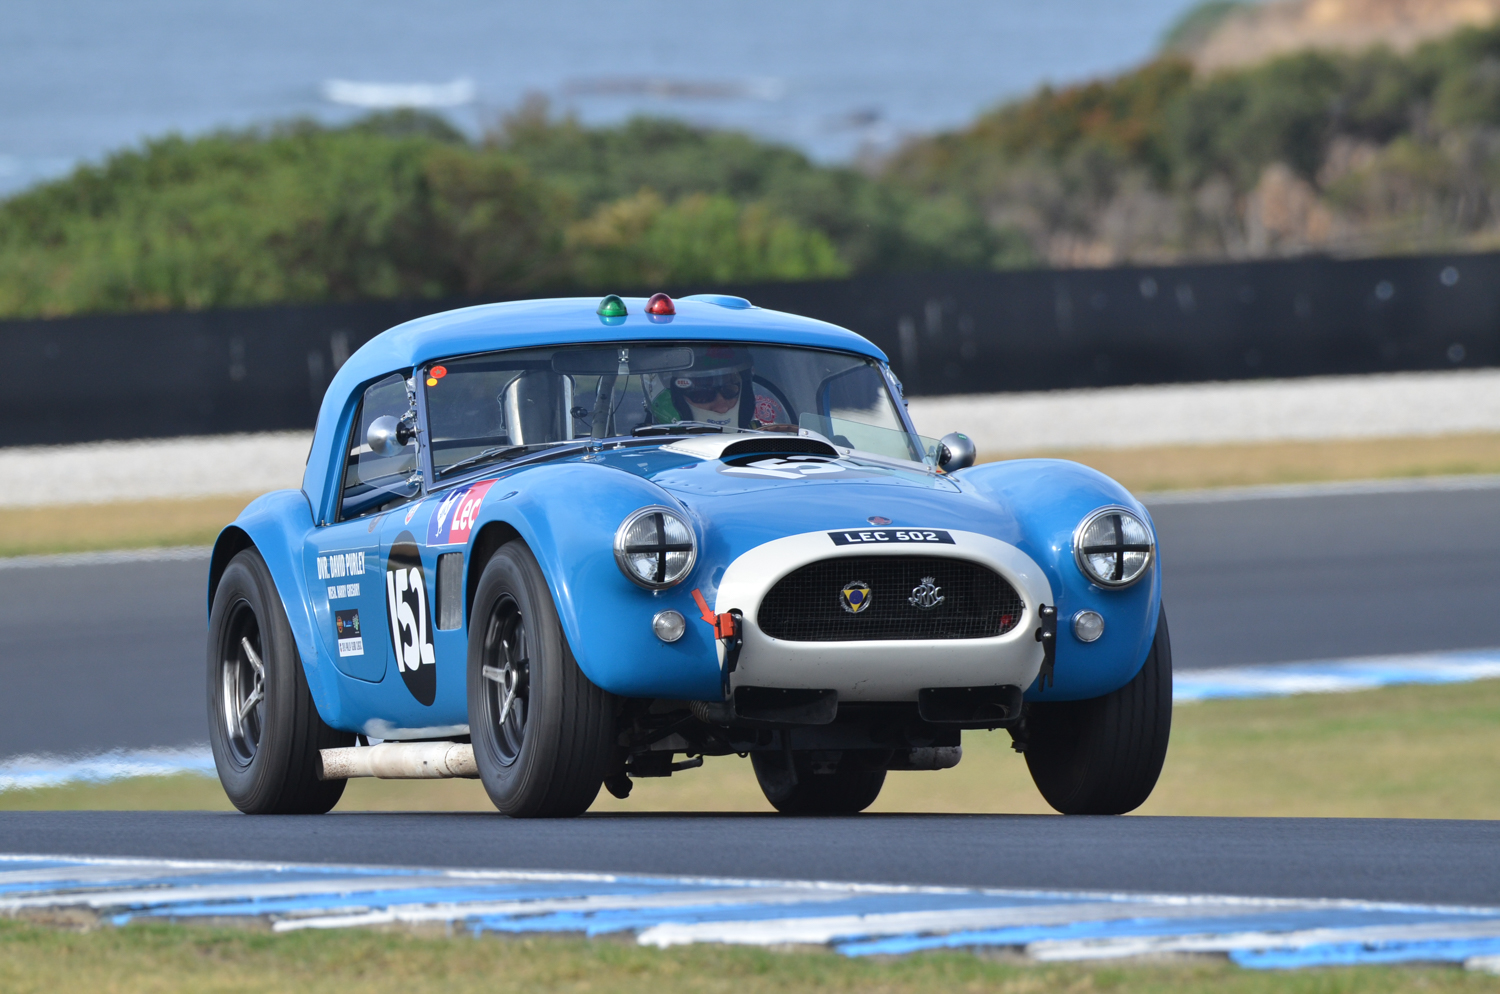 David Cooke visiting from the UK in his AC Cobra. Neil Hammond Photo.